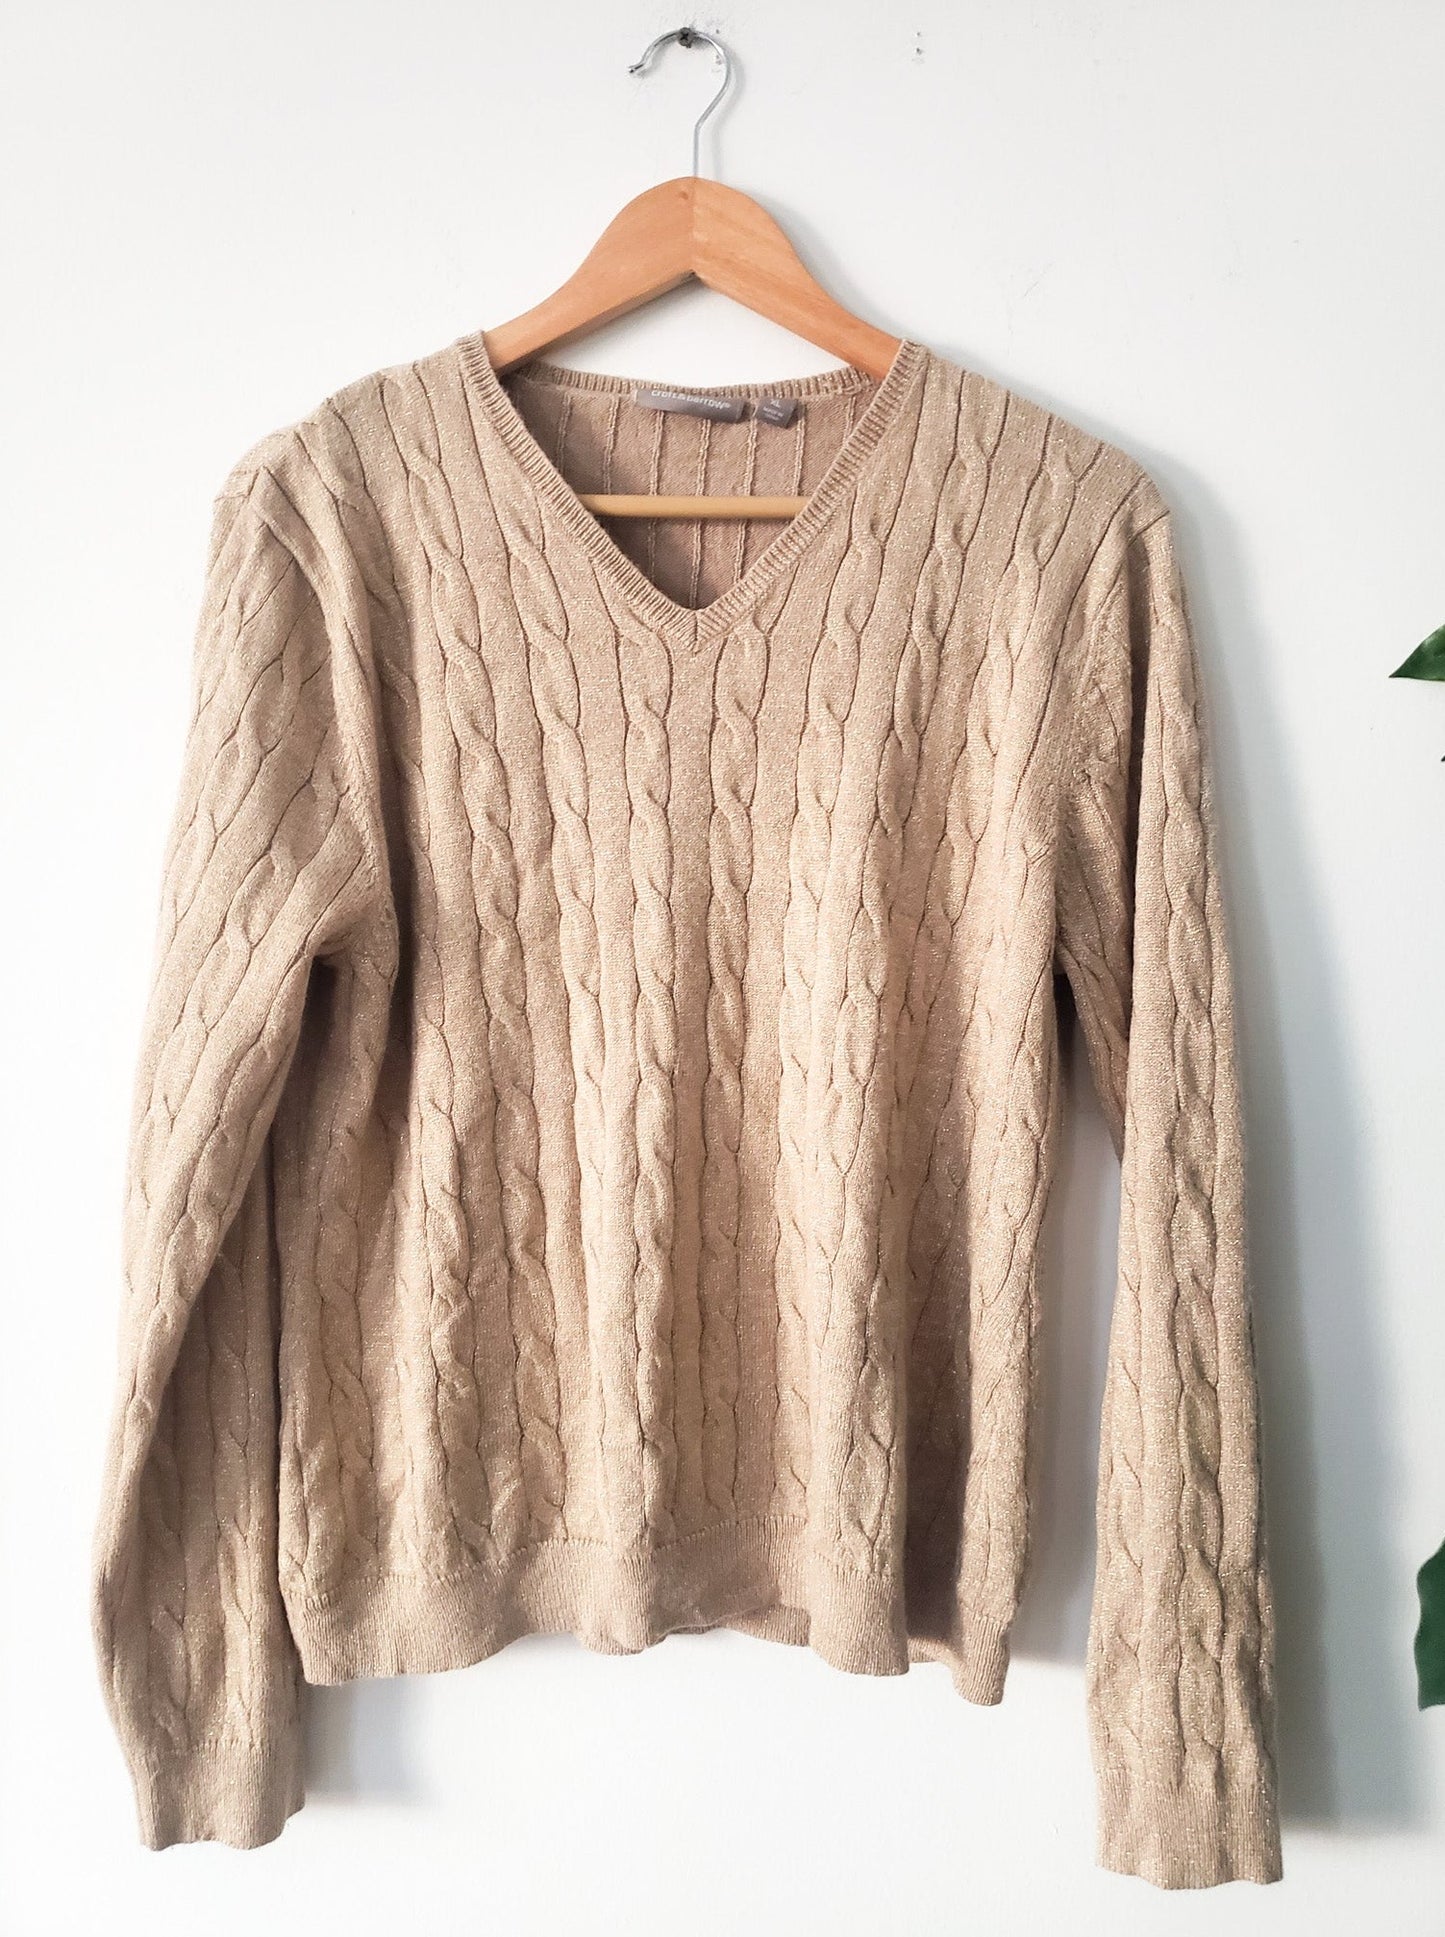 CROFT & BARROW GOLD CABLE KNIT SWEATER SIZE XL